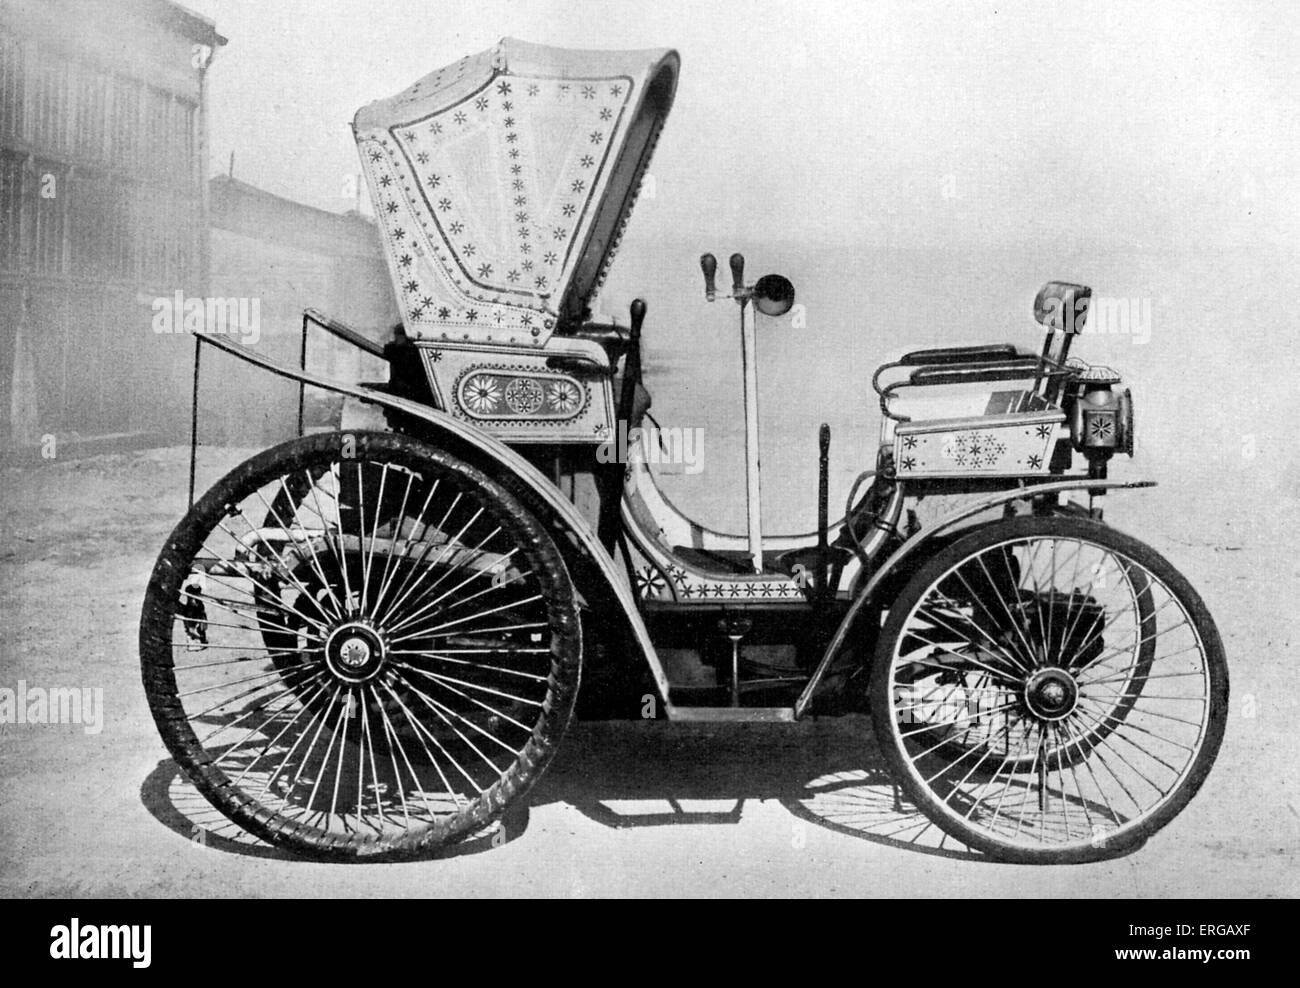 Peugeot from 1849, owned by the Bey (governer) of Tunis. Motor 2CV 3/4 Panhard. Stock Photo